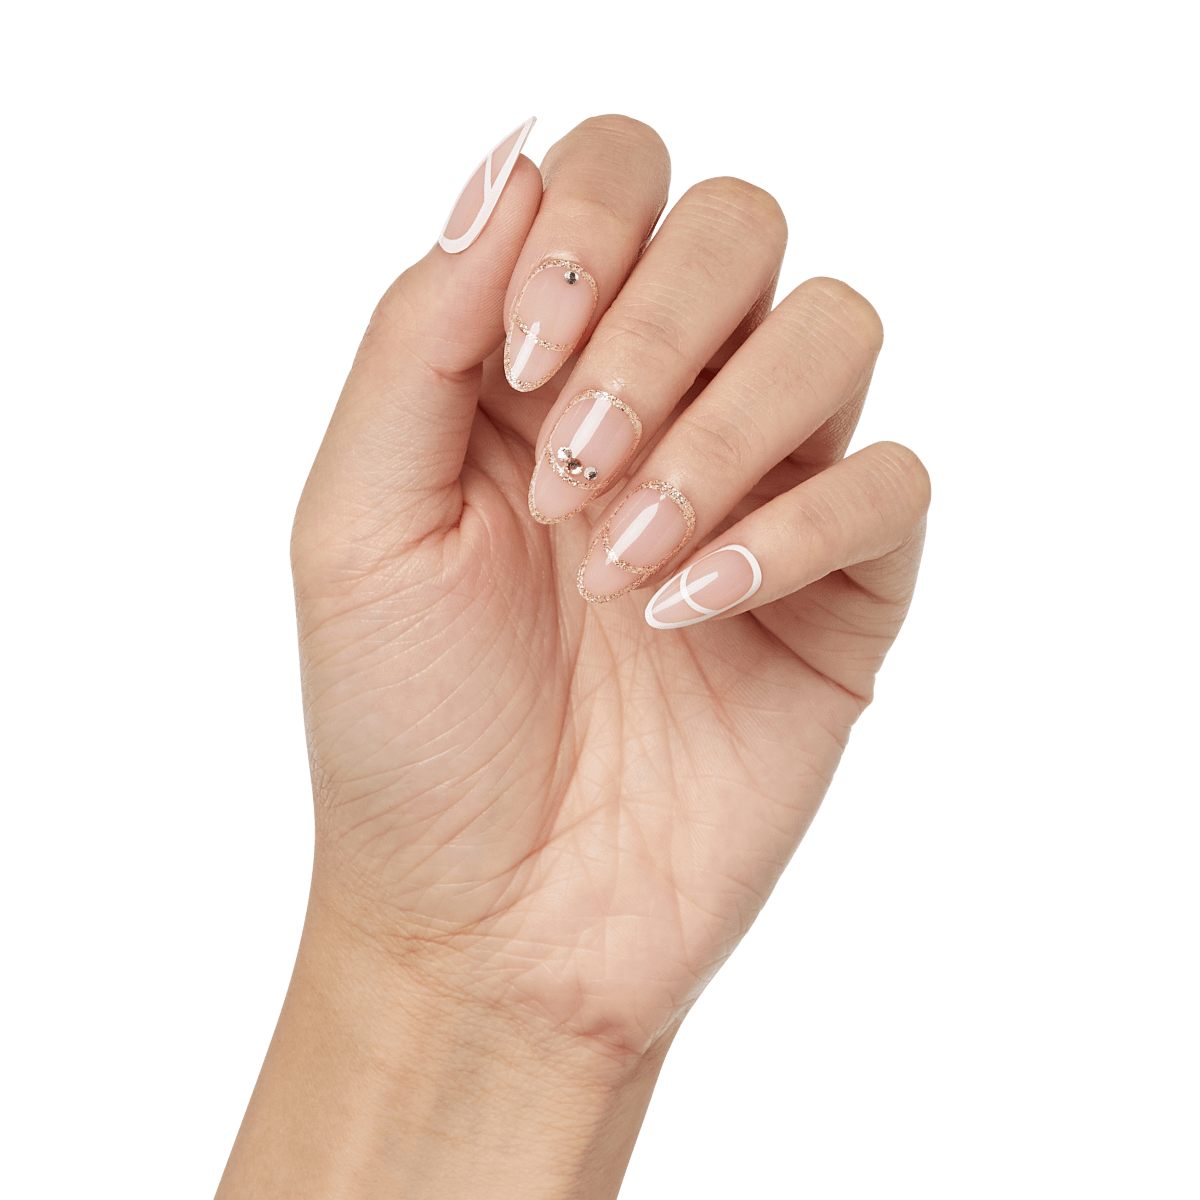 KISS Premium Classy Nails - Over the Moon